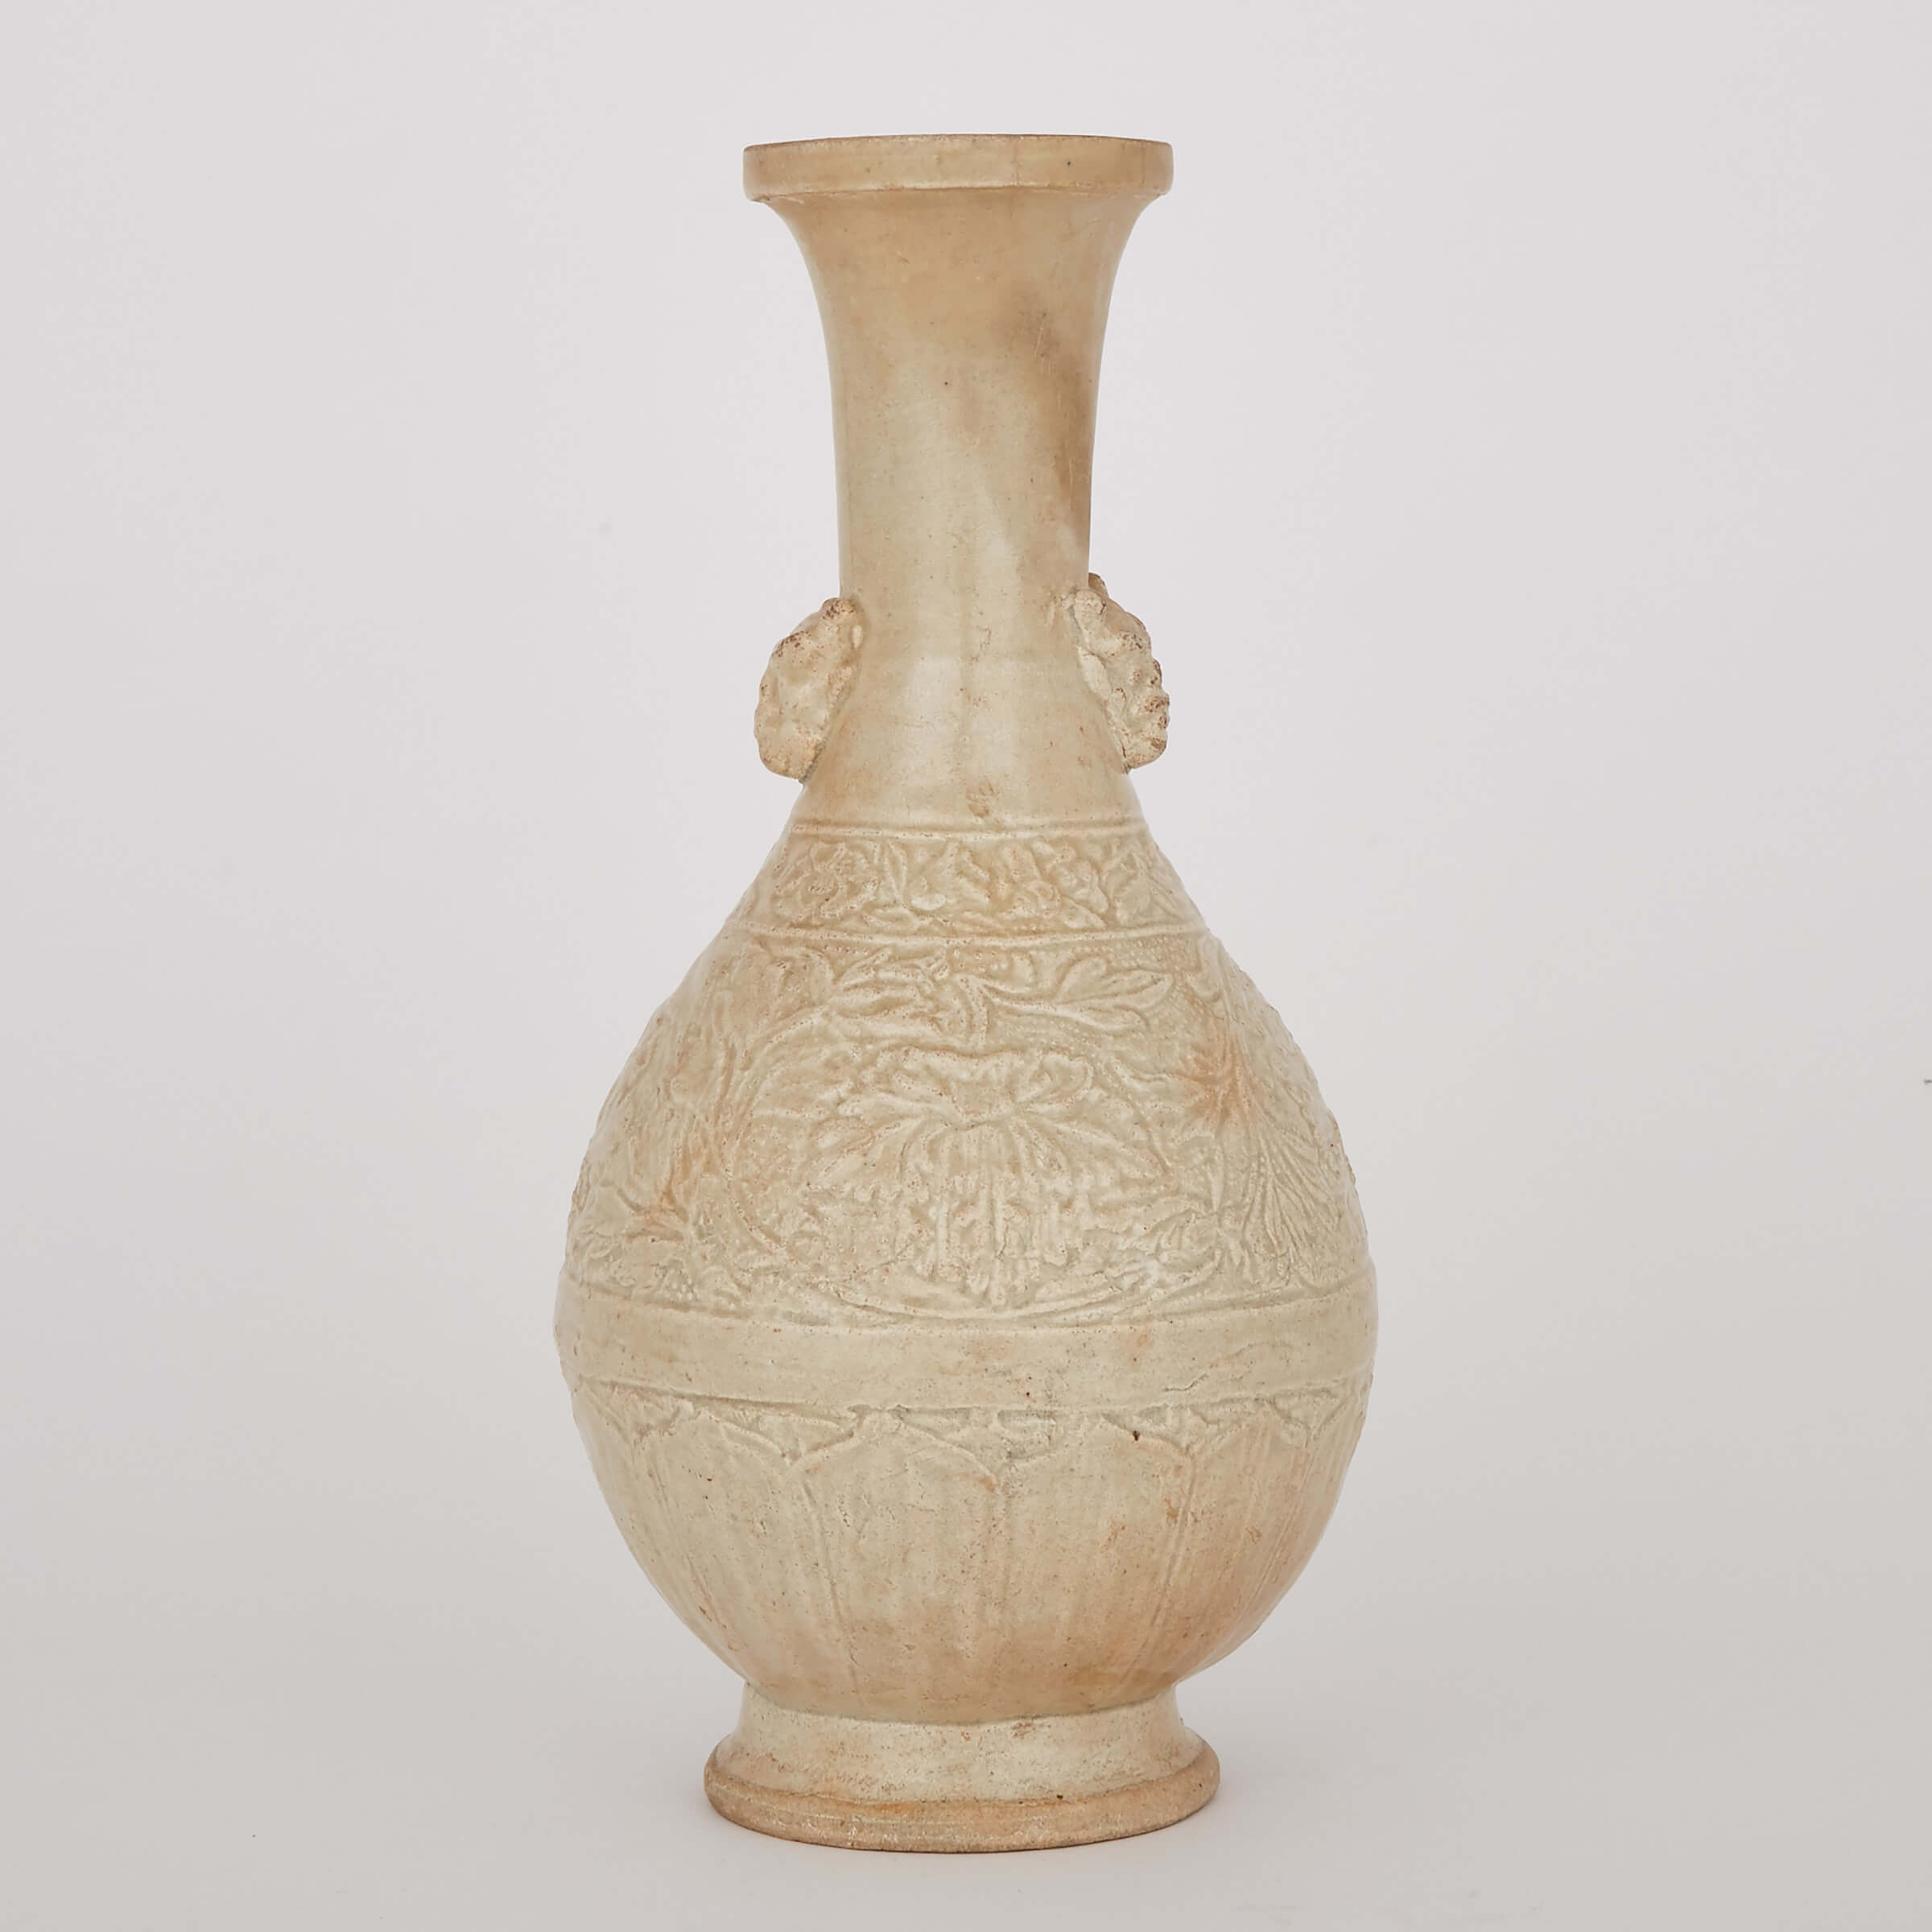 A Yingqing Glazed Moulded Vase, Yuan Dynasty